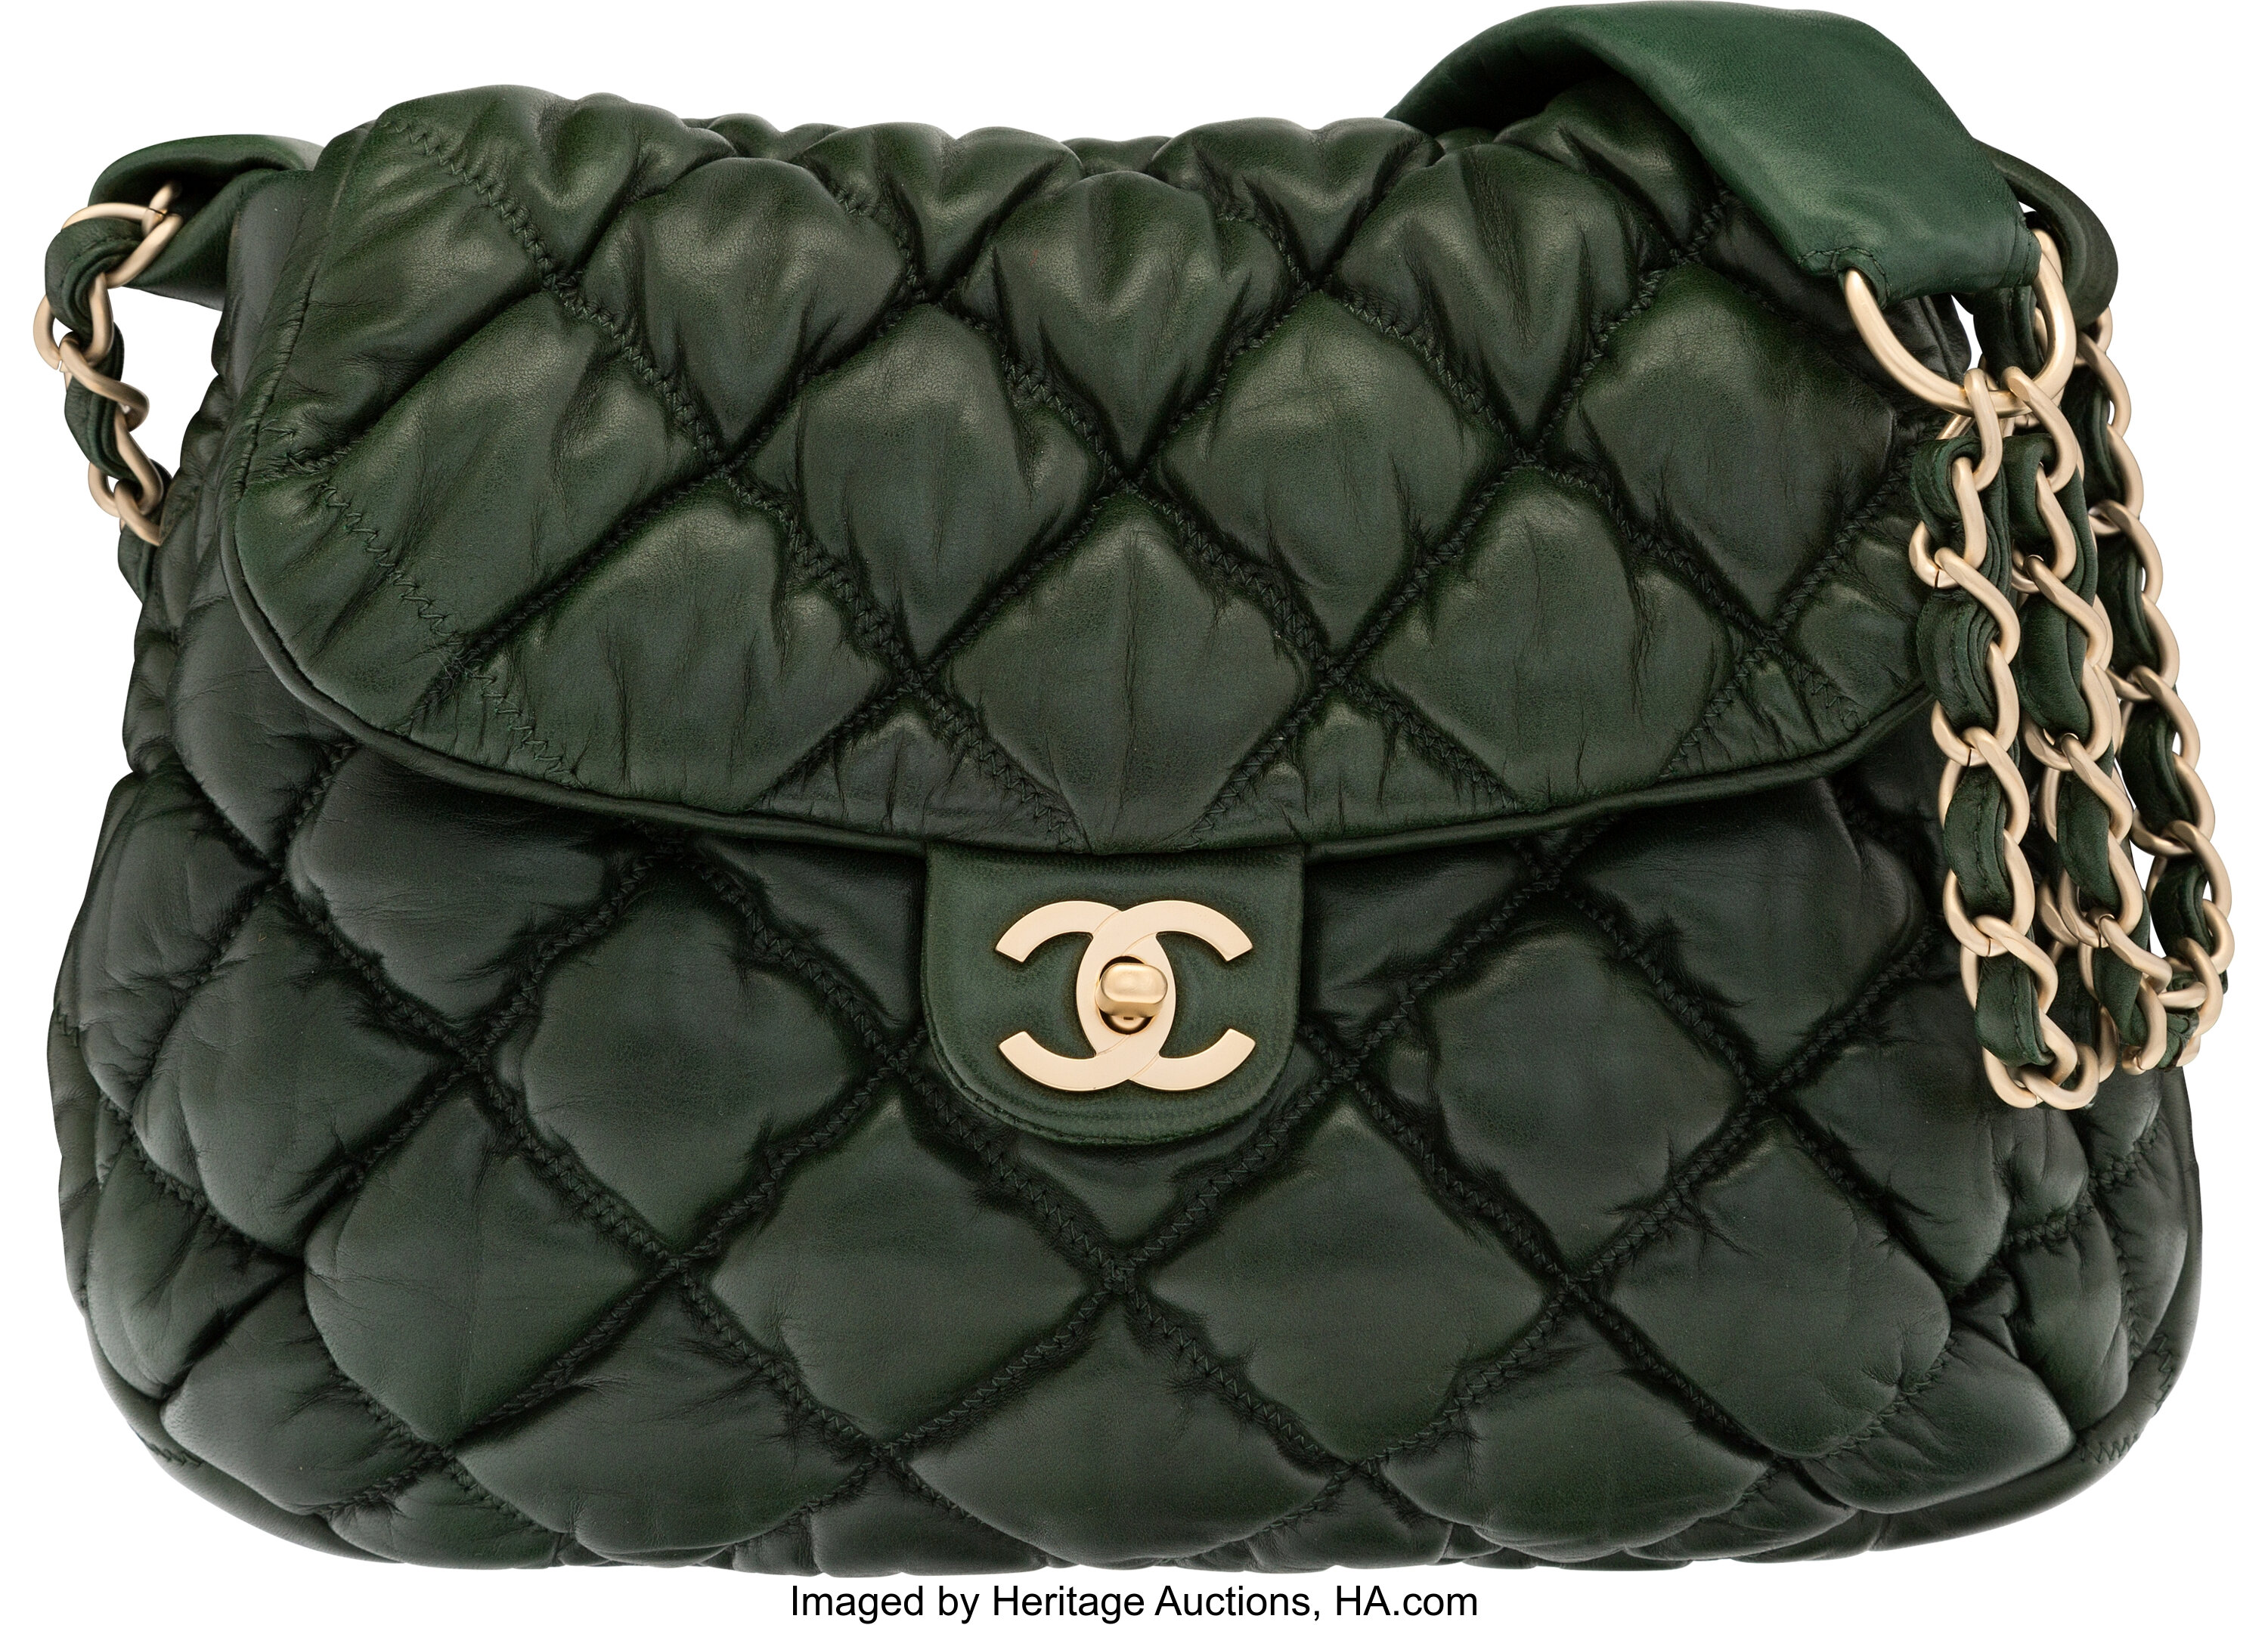 Chanel Dark Green Bubble Quilted Lambskin Leather Shoulder Bag., Lot  #58388